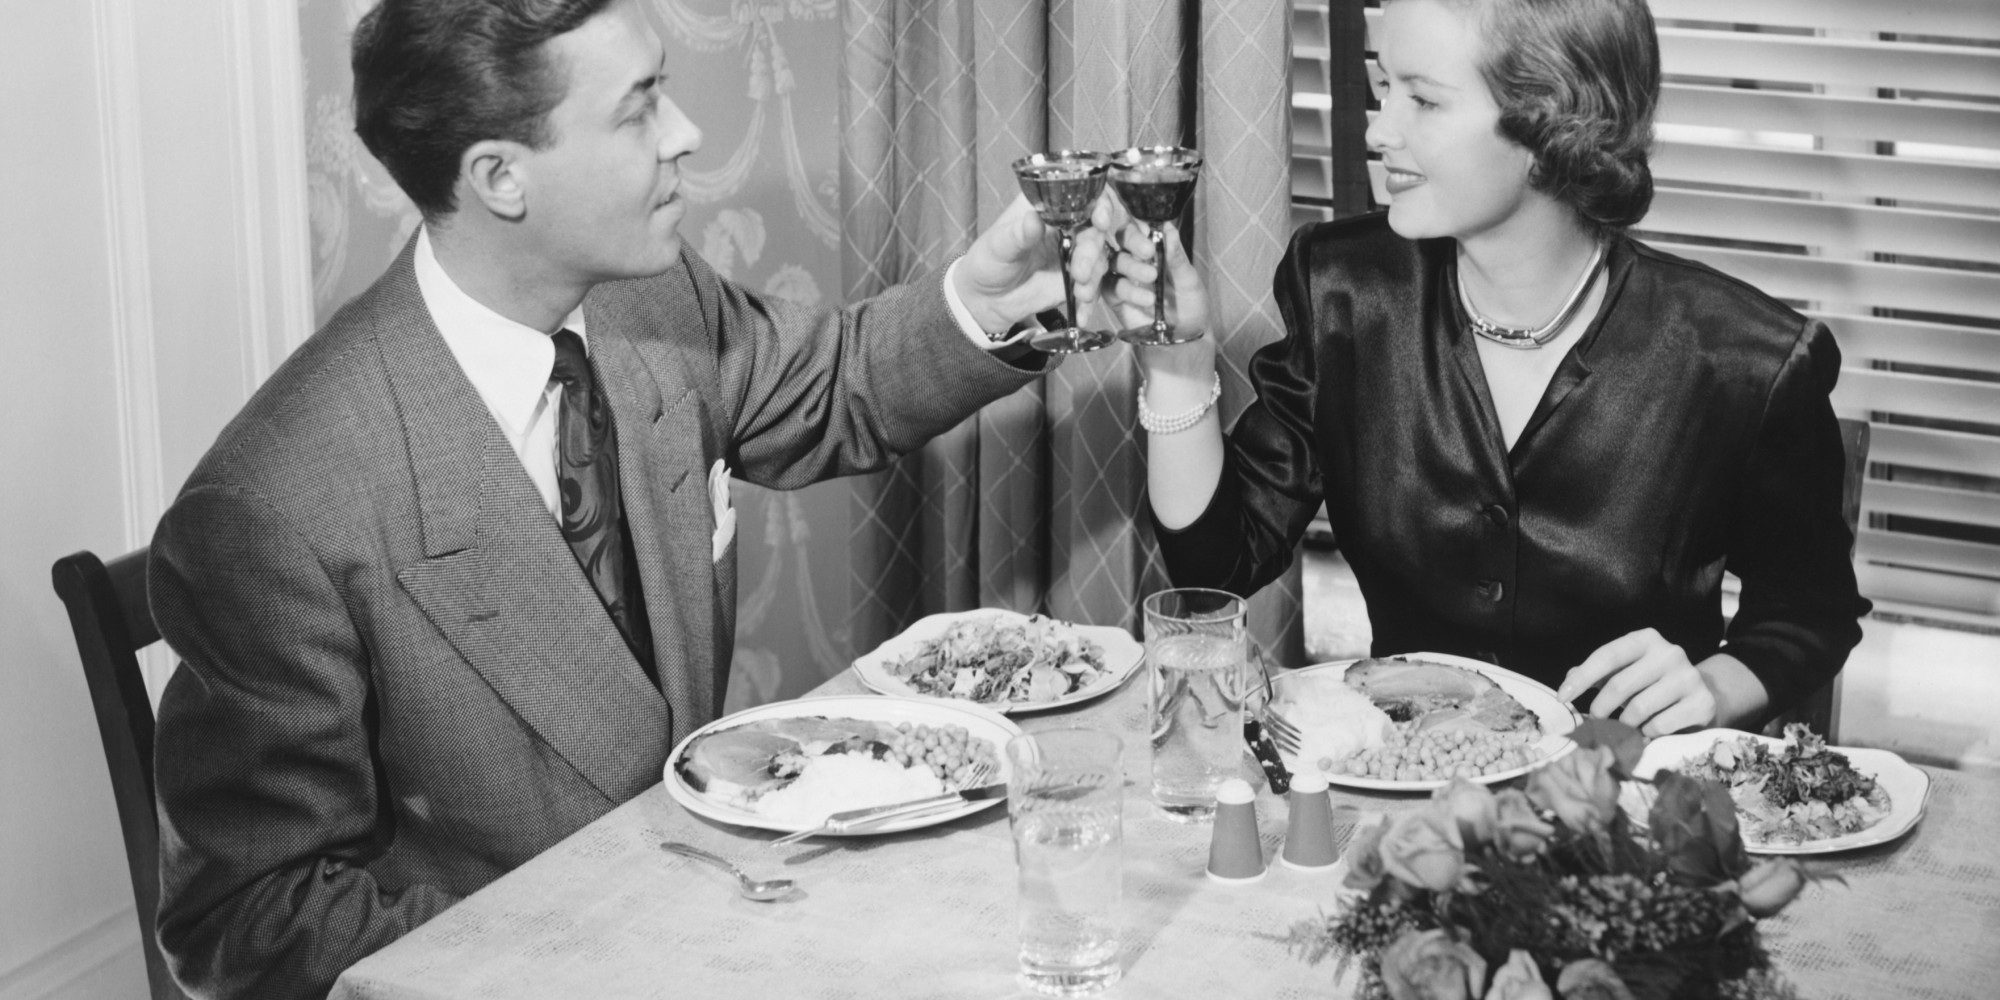 First Date Tips: What to Talk About and What Topics Are Taboo | HuffPost